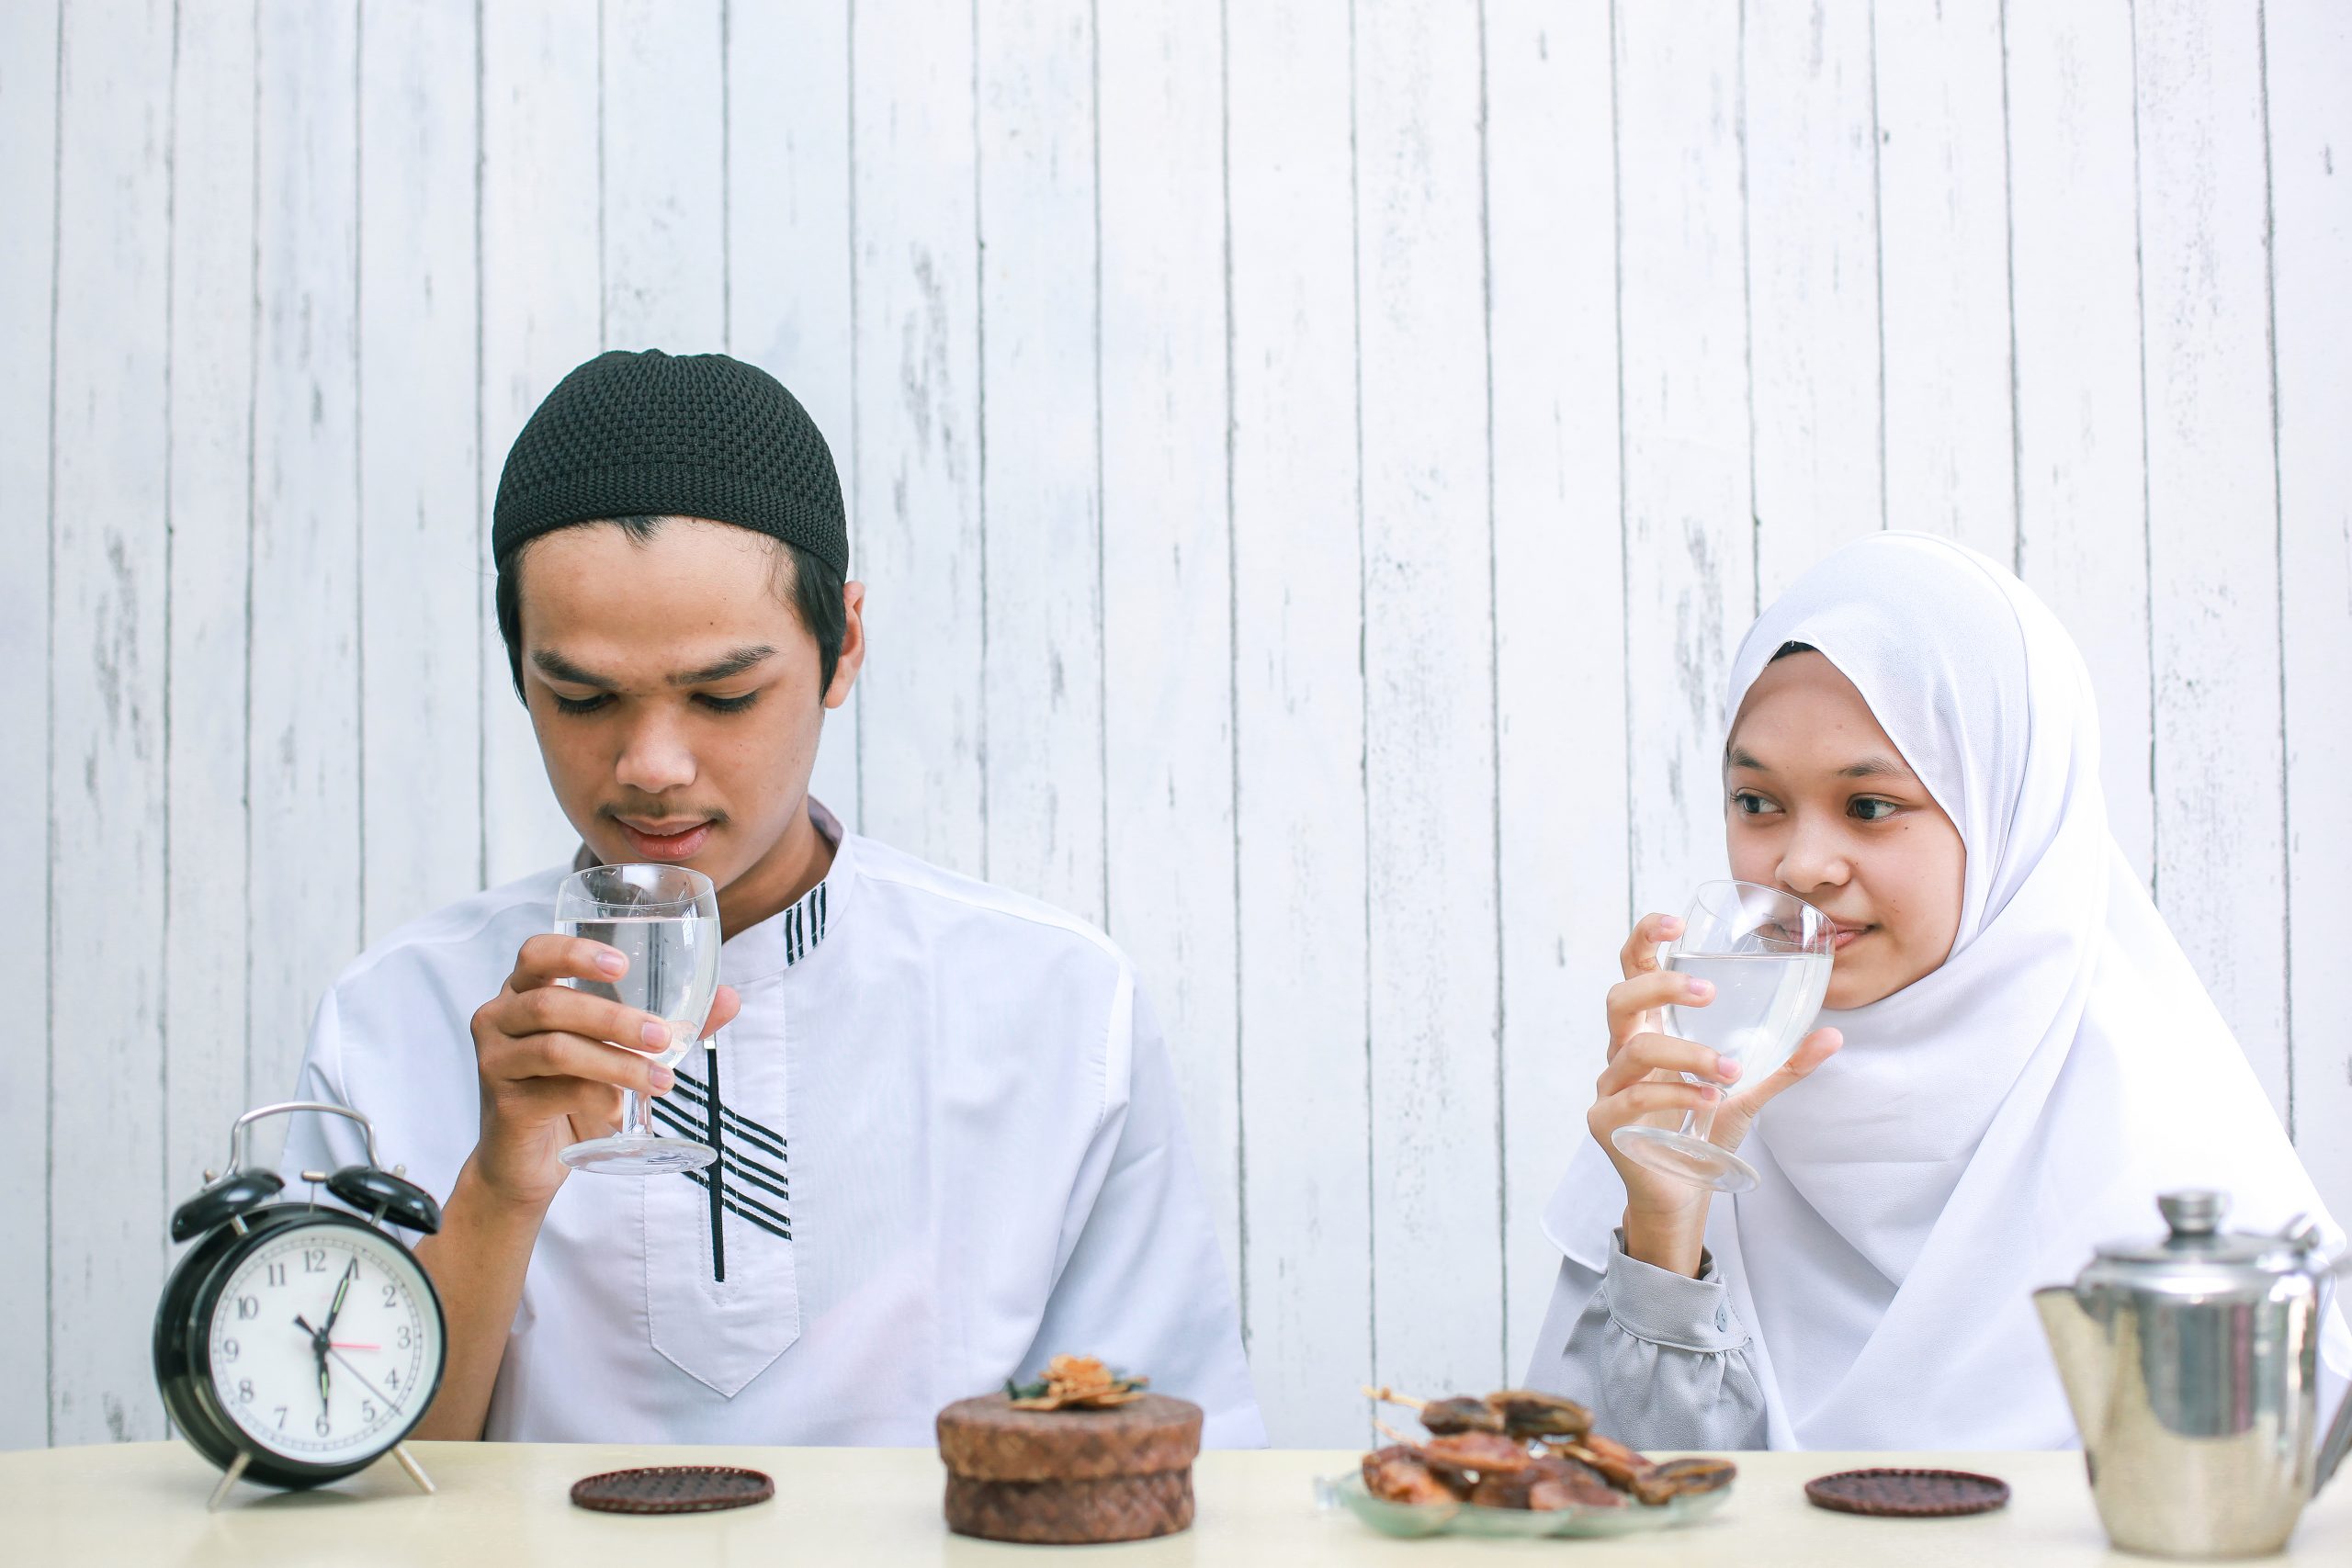 muslim-couple-drinking-together-at-iftar-time-2021-09-01-00-34-42-utc-scaled